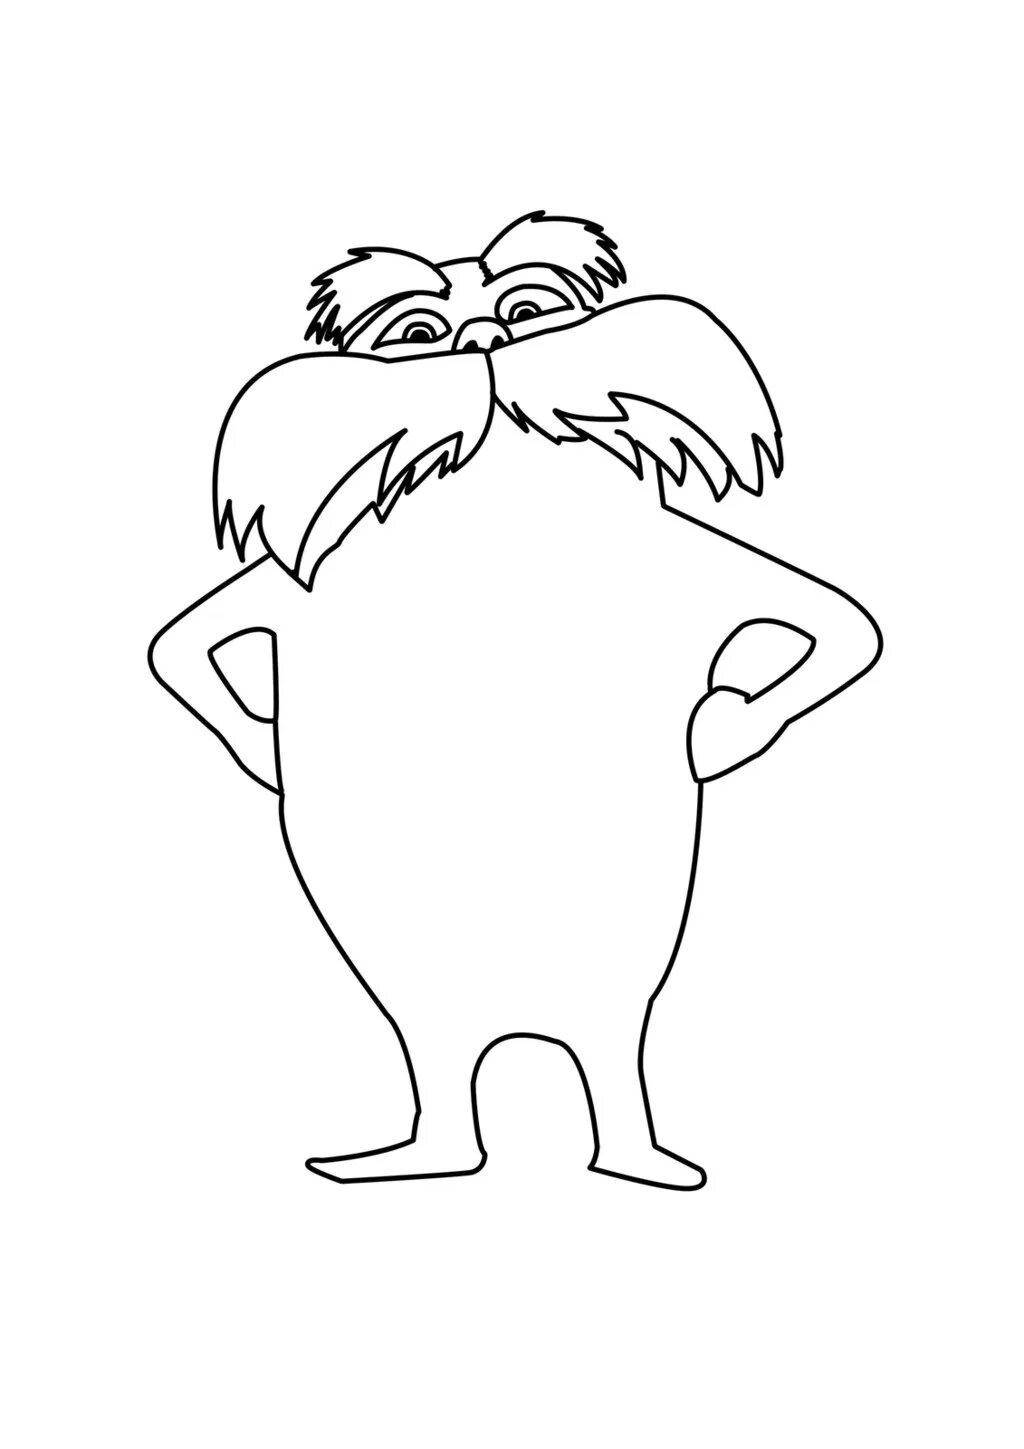 Adorable lorax coloring page